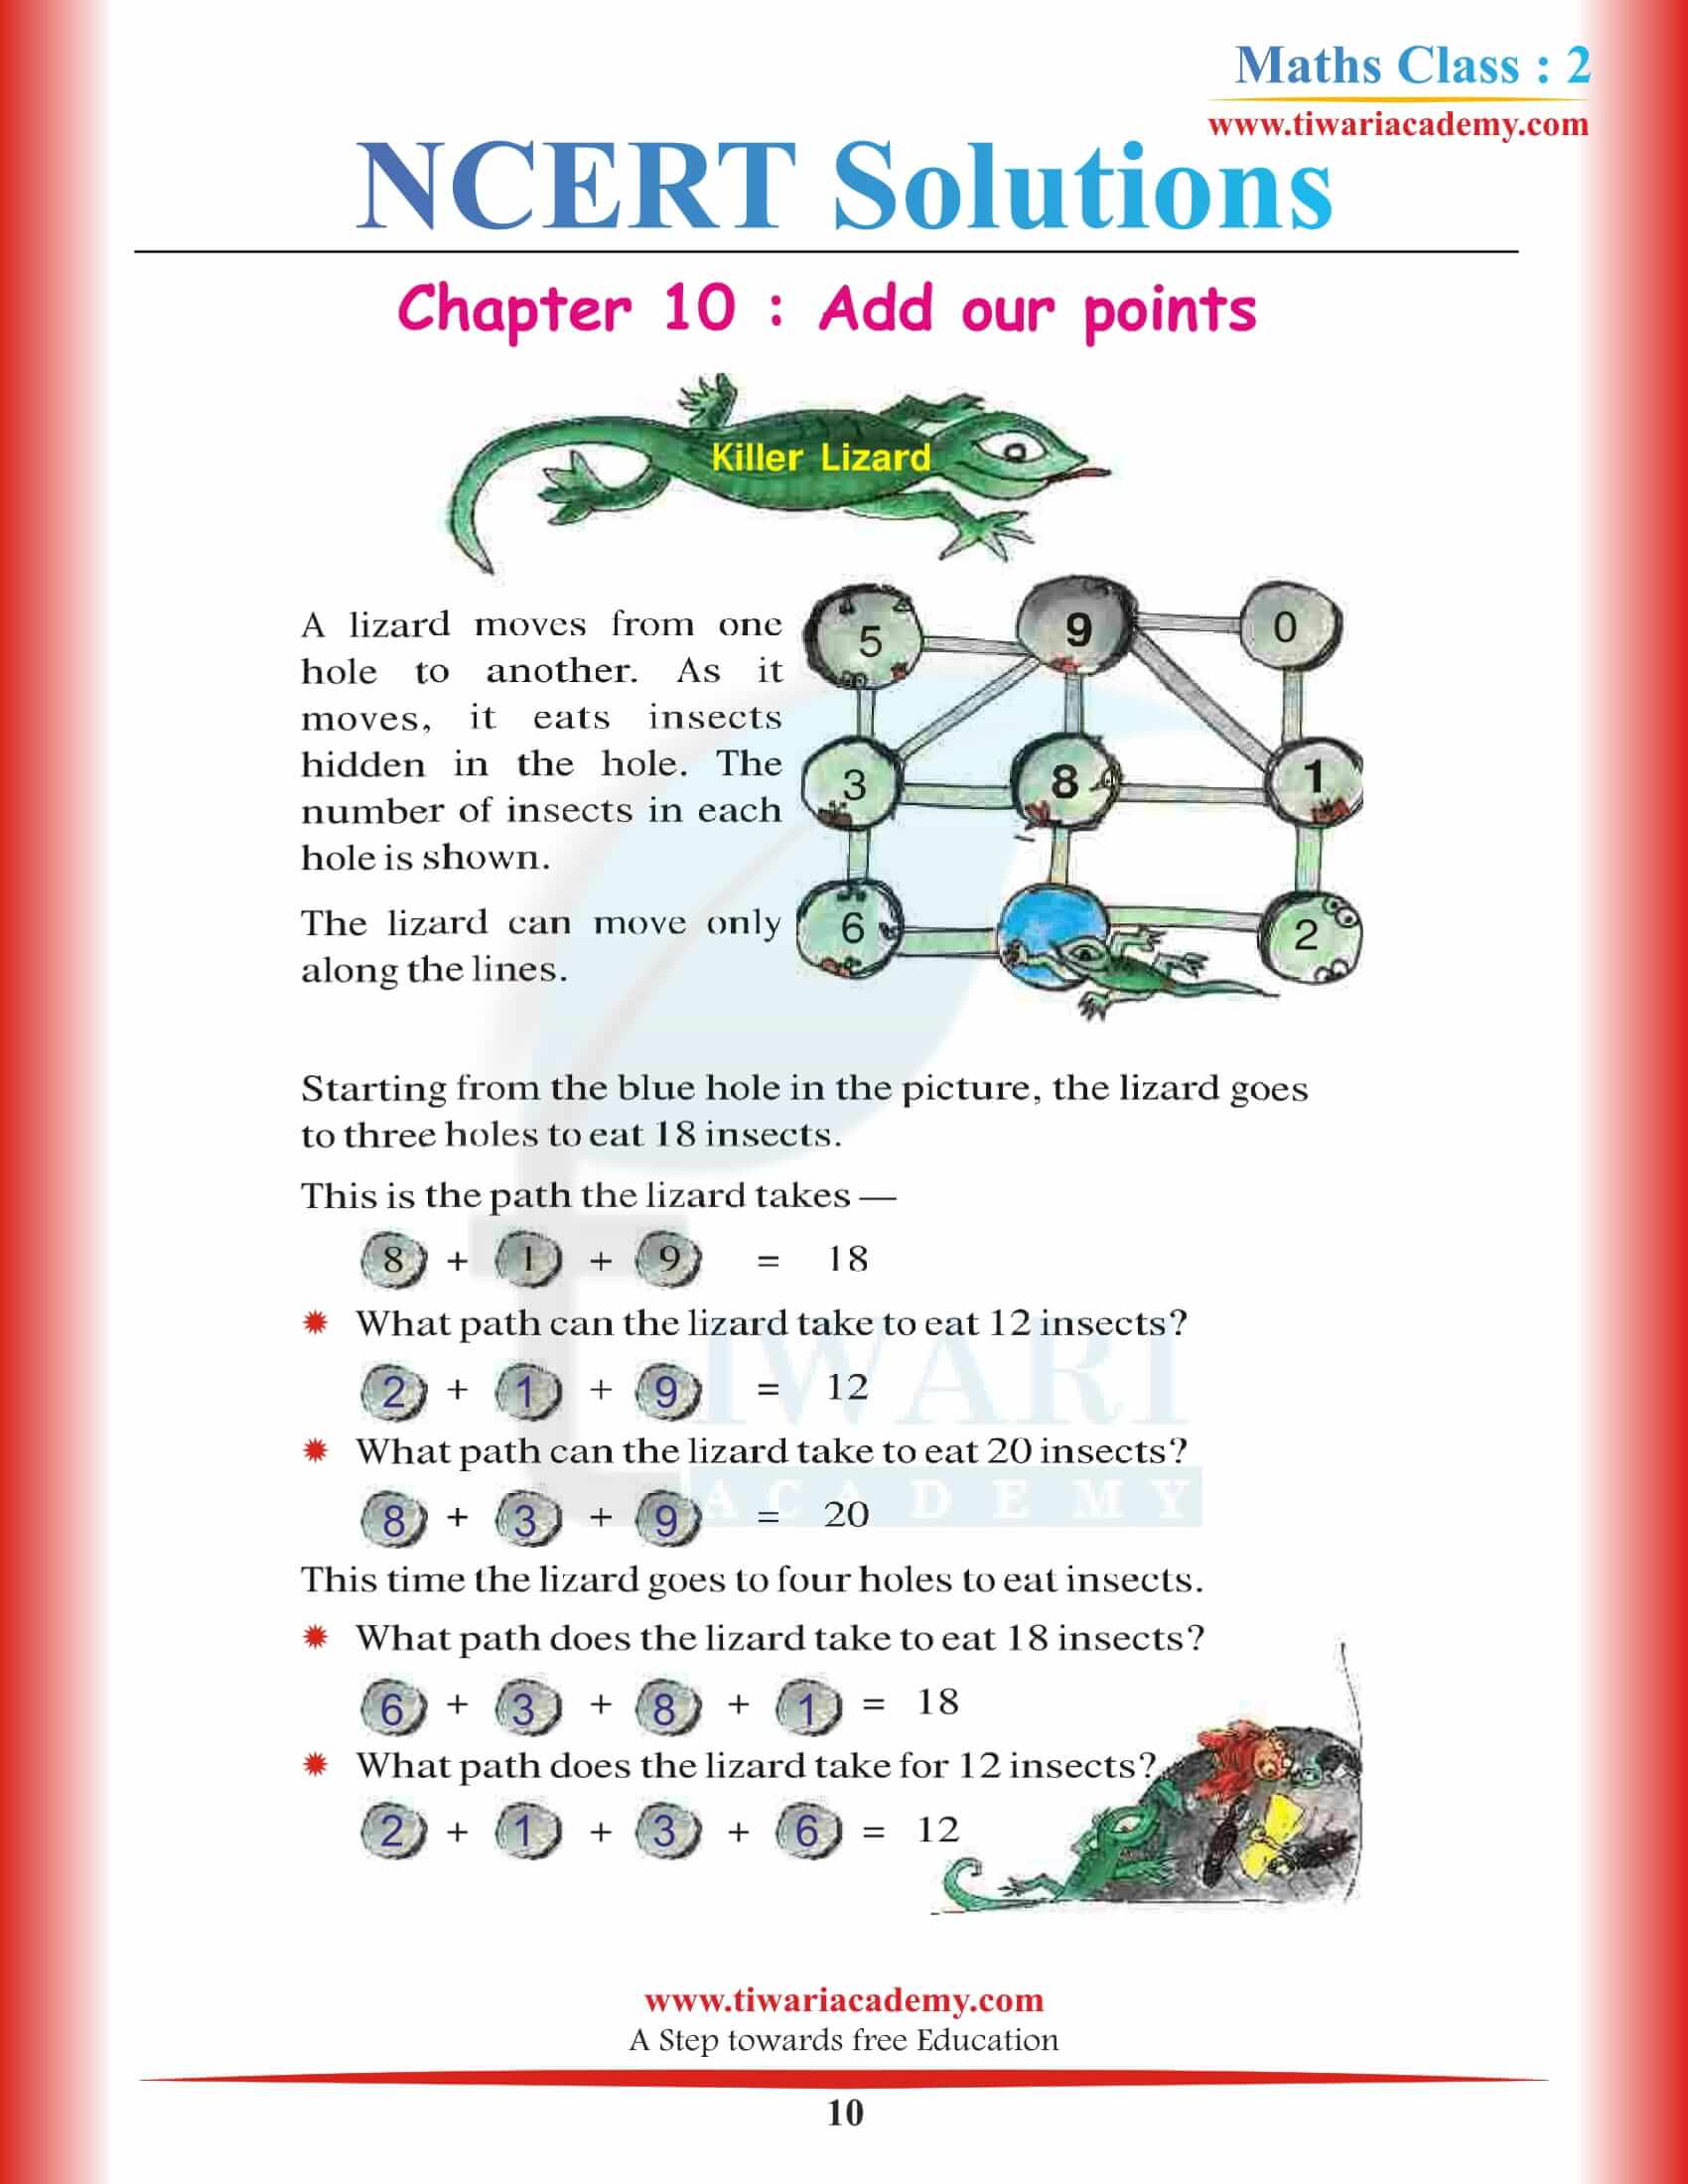 NCERT Solutions for Class 2 Maths Chapter 10 guide